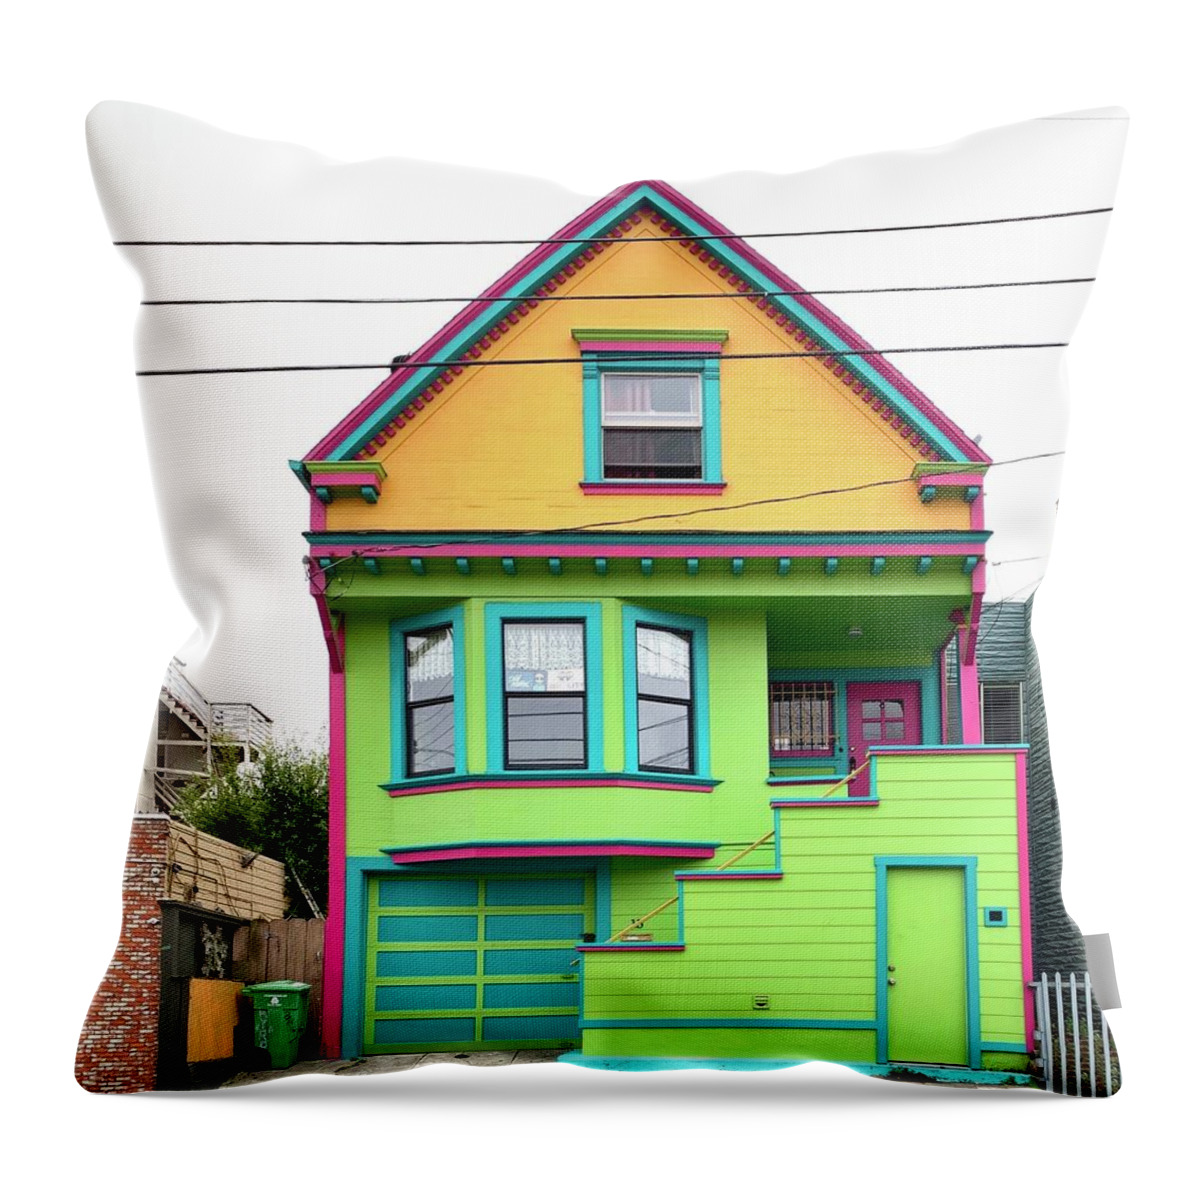  Throw Pillow featuring the photograph Color Pop House by Julie Gebhardt